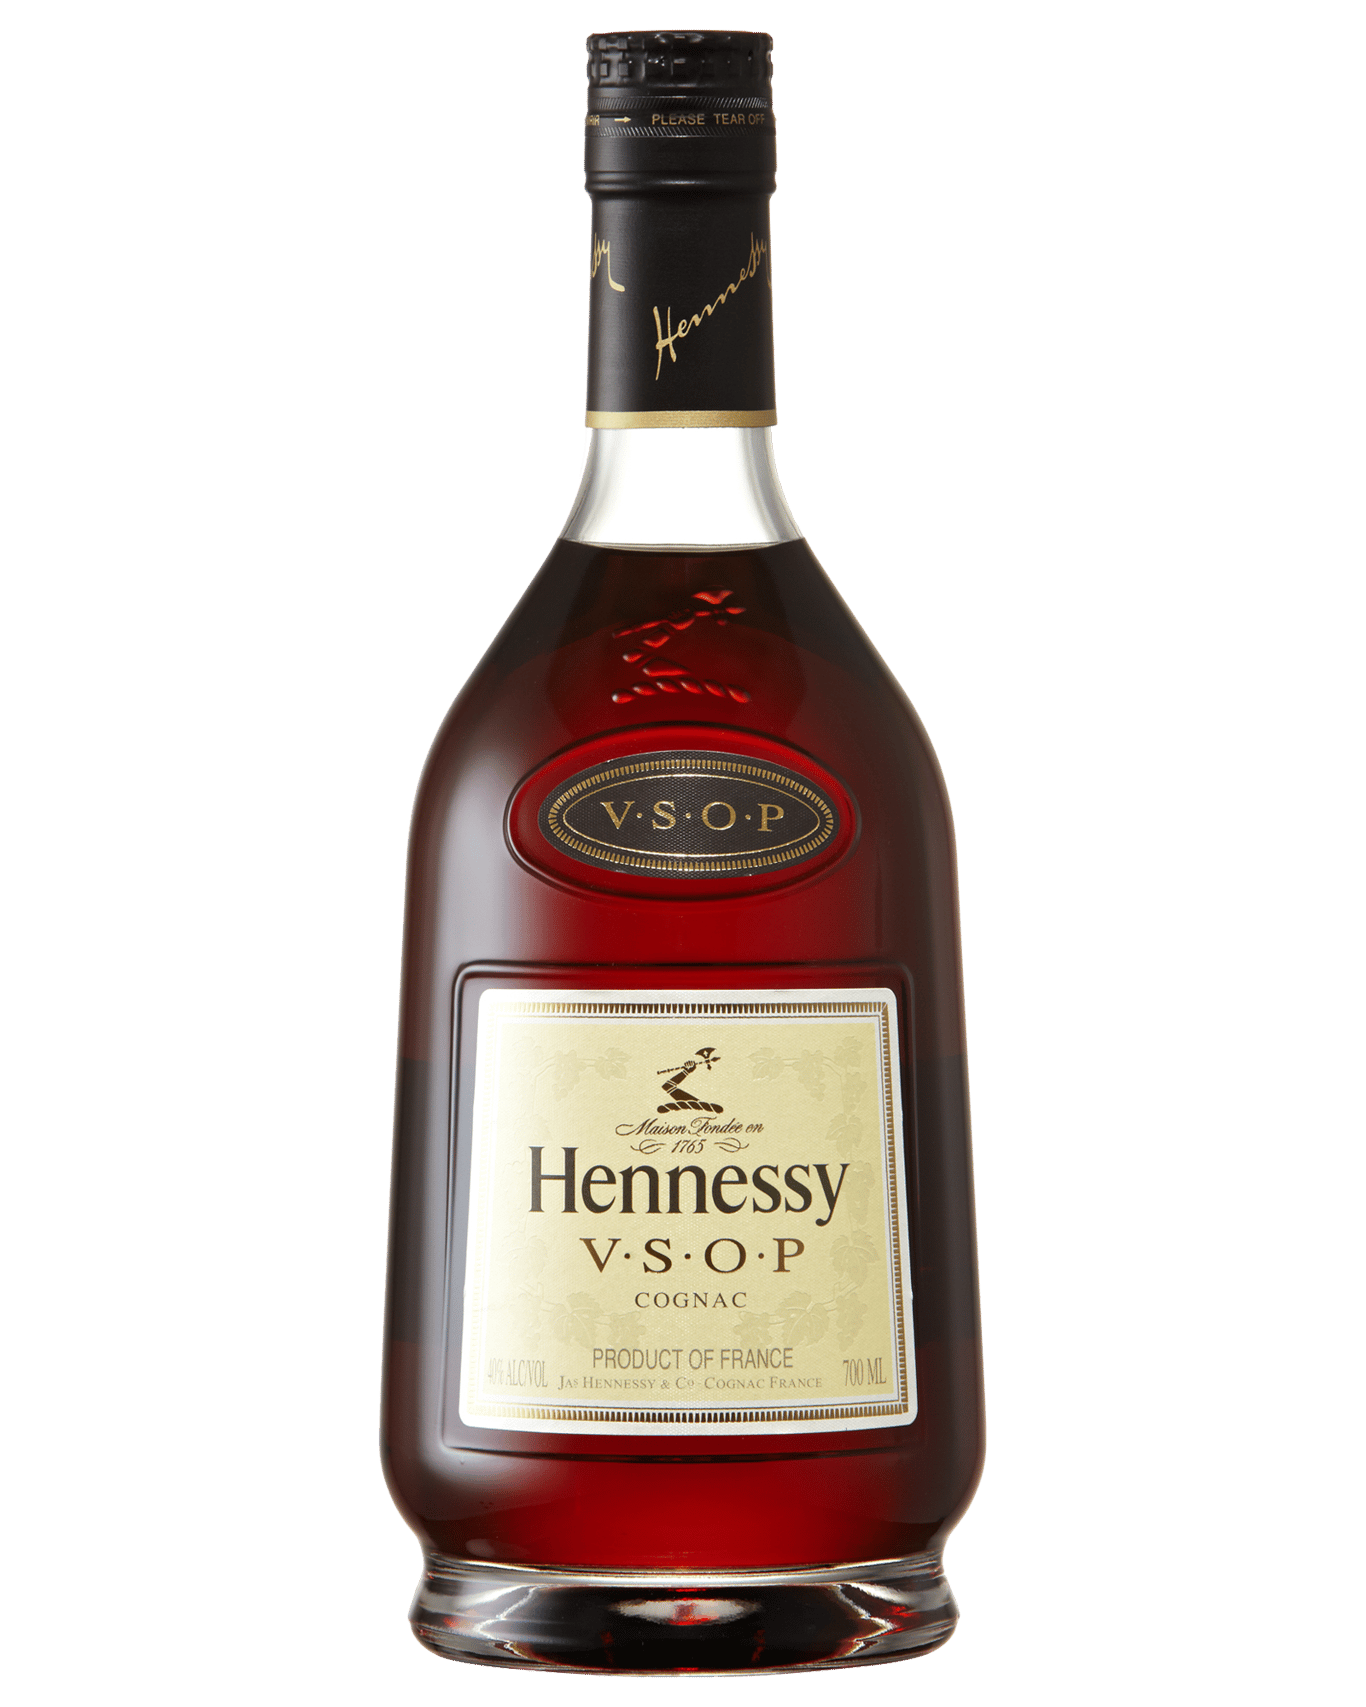 Buy Hennessy Vsop Cognac Gift Pack Online (Lowest Price Guarantee ...